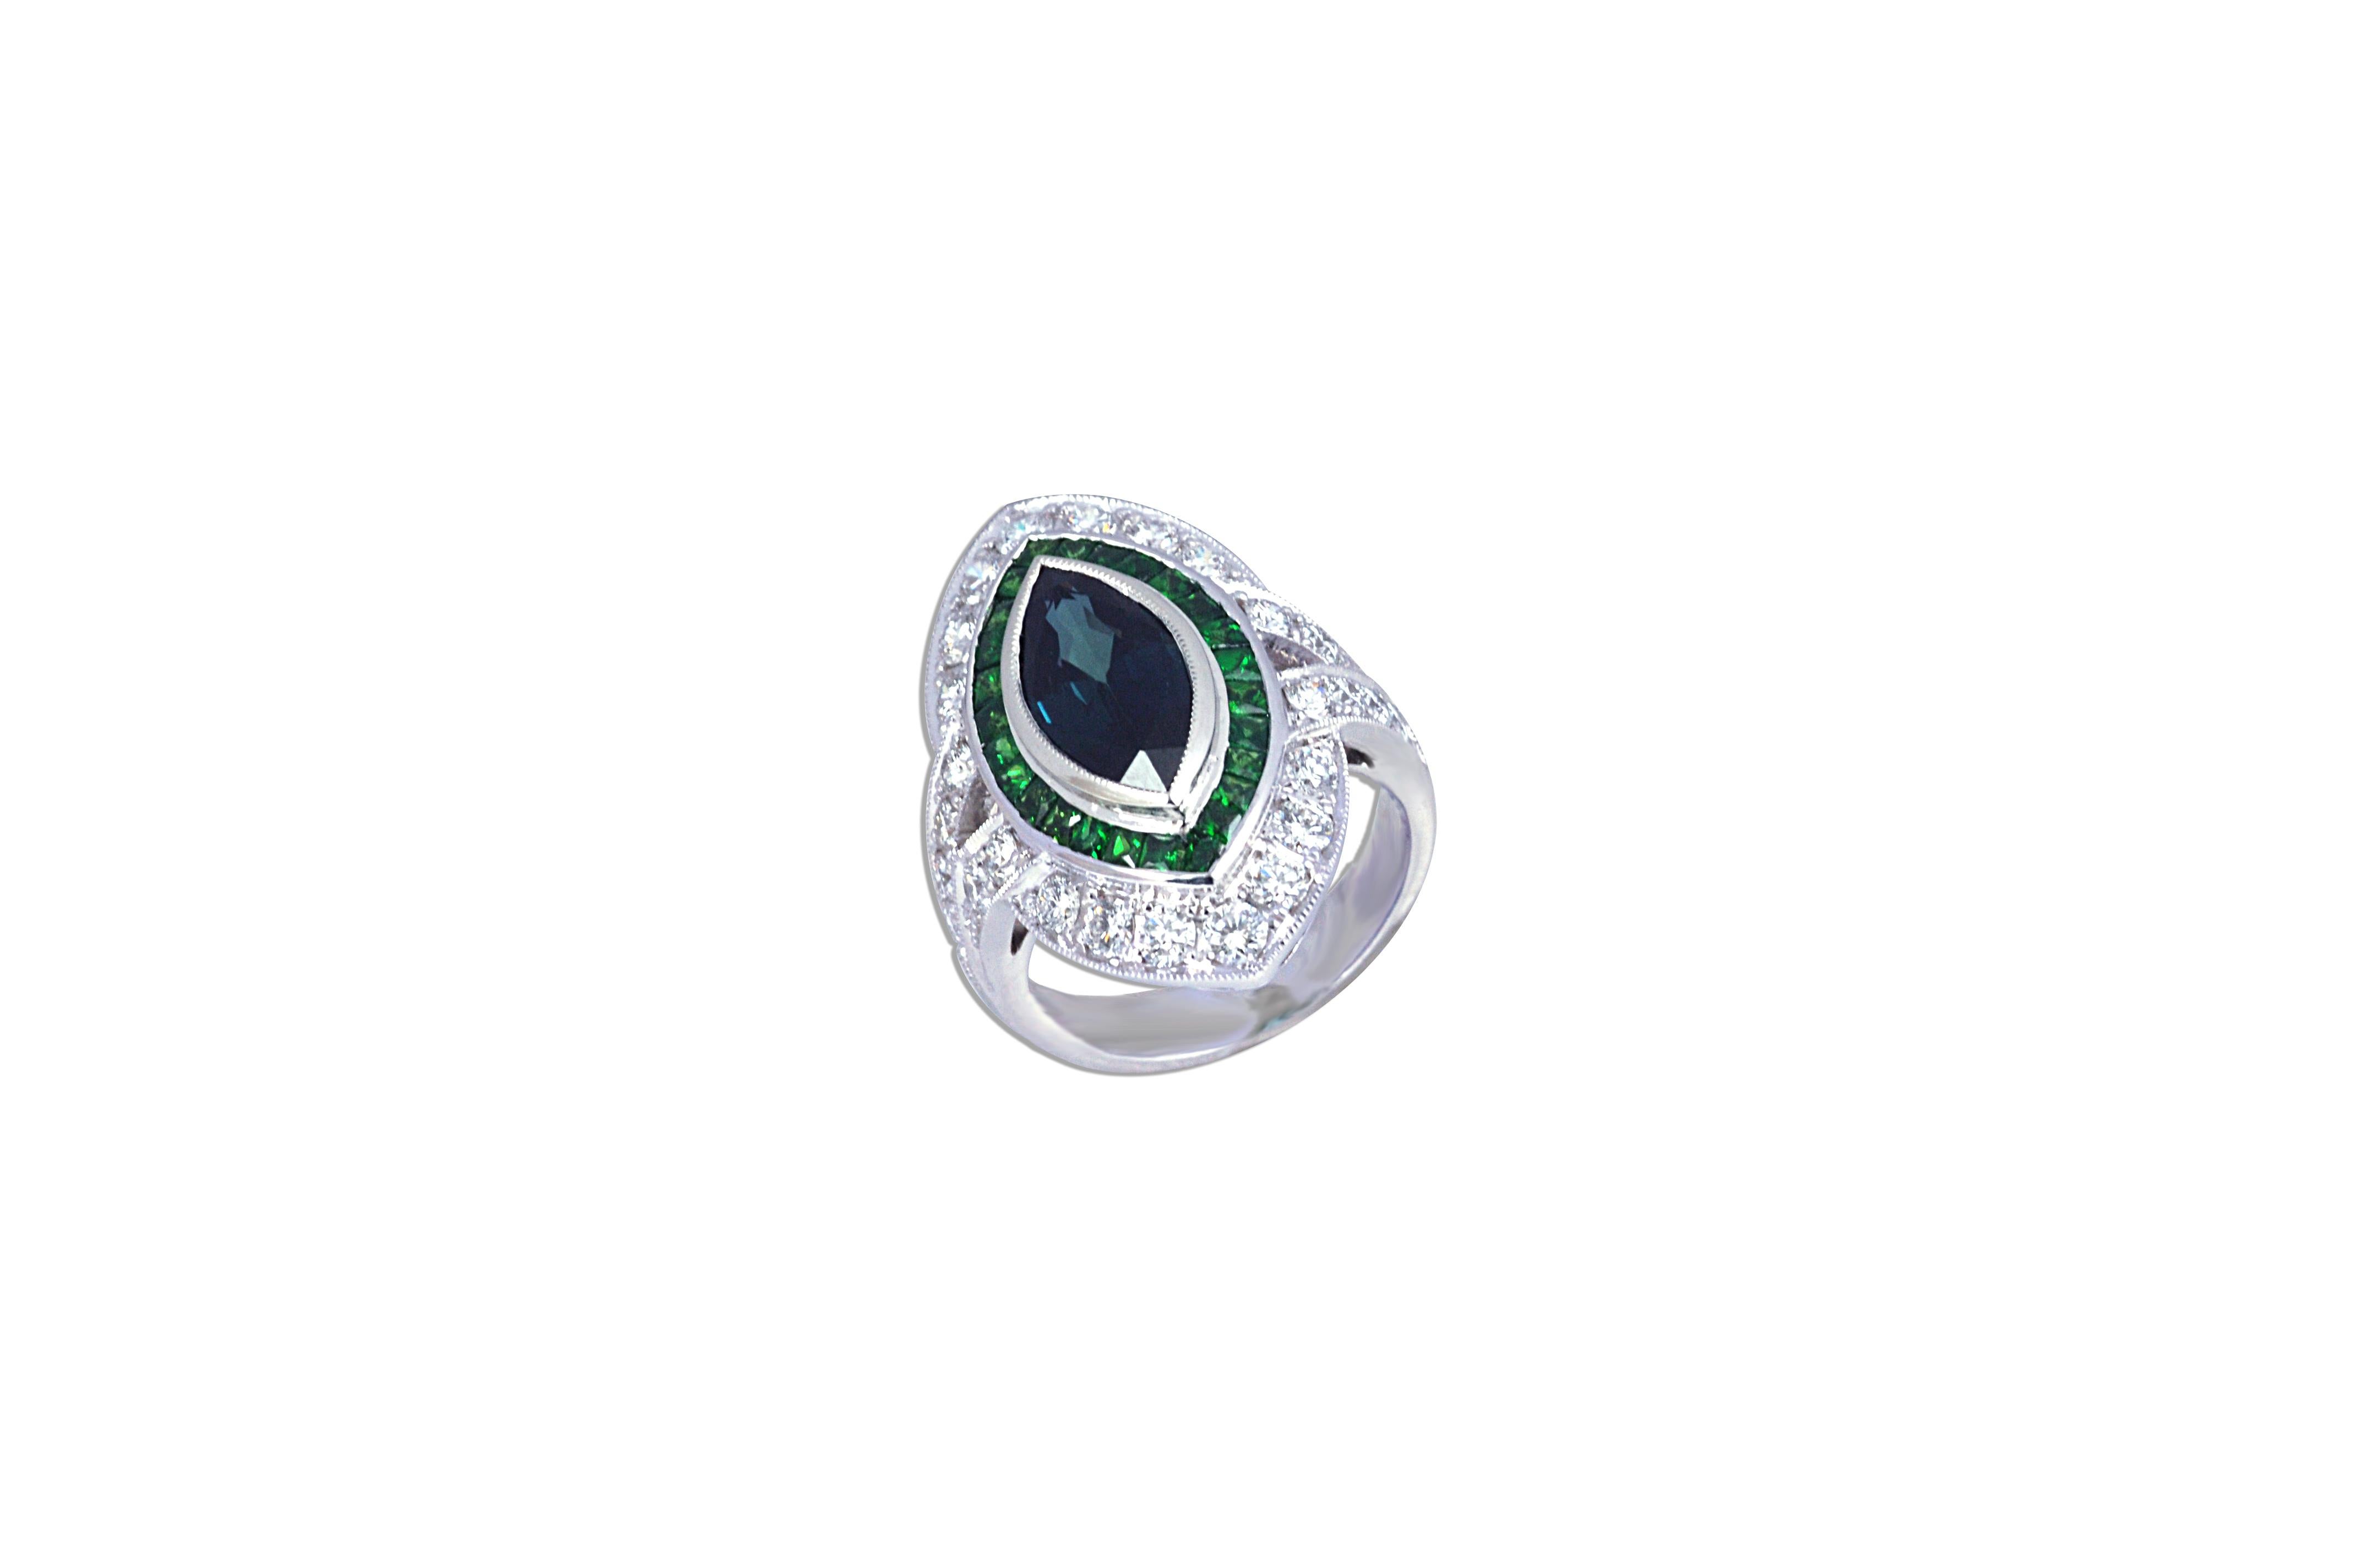  This Art deco inspired ring is centered with a bezel-set marquise shaped blue Sapphire, surrounded by  Tsavorites 0.92 carat and round brilliant-cut Diamond 1.24 carats set in 18 karat White Gold. 
 
The ring is currently a size 52 (6 1/4 US) ,